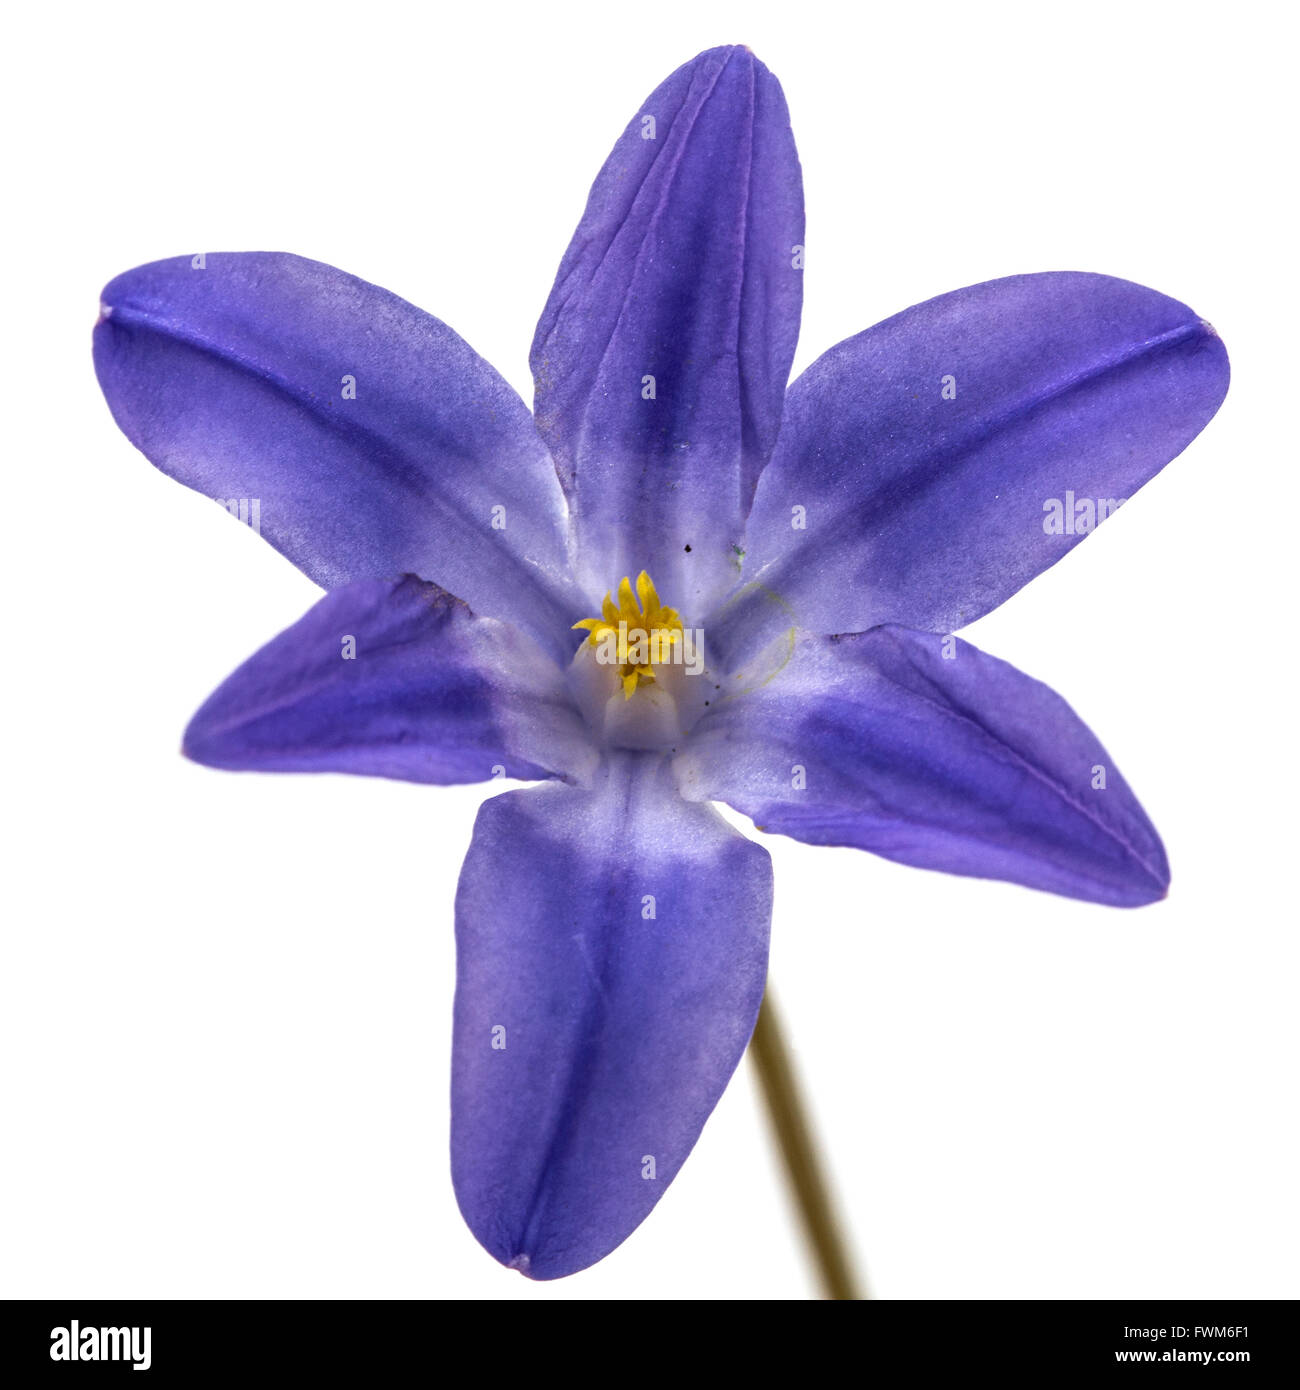 Violet flowers of Chionodoxa luciliae, Glory of the snow, isolated on white background Stock Photo